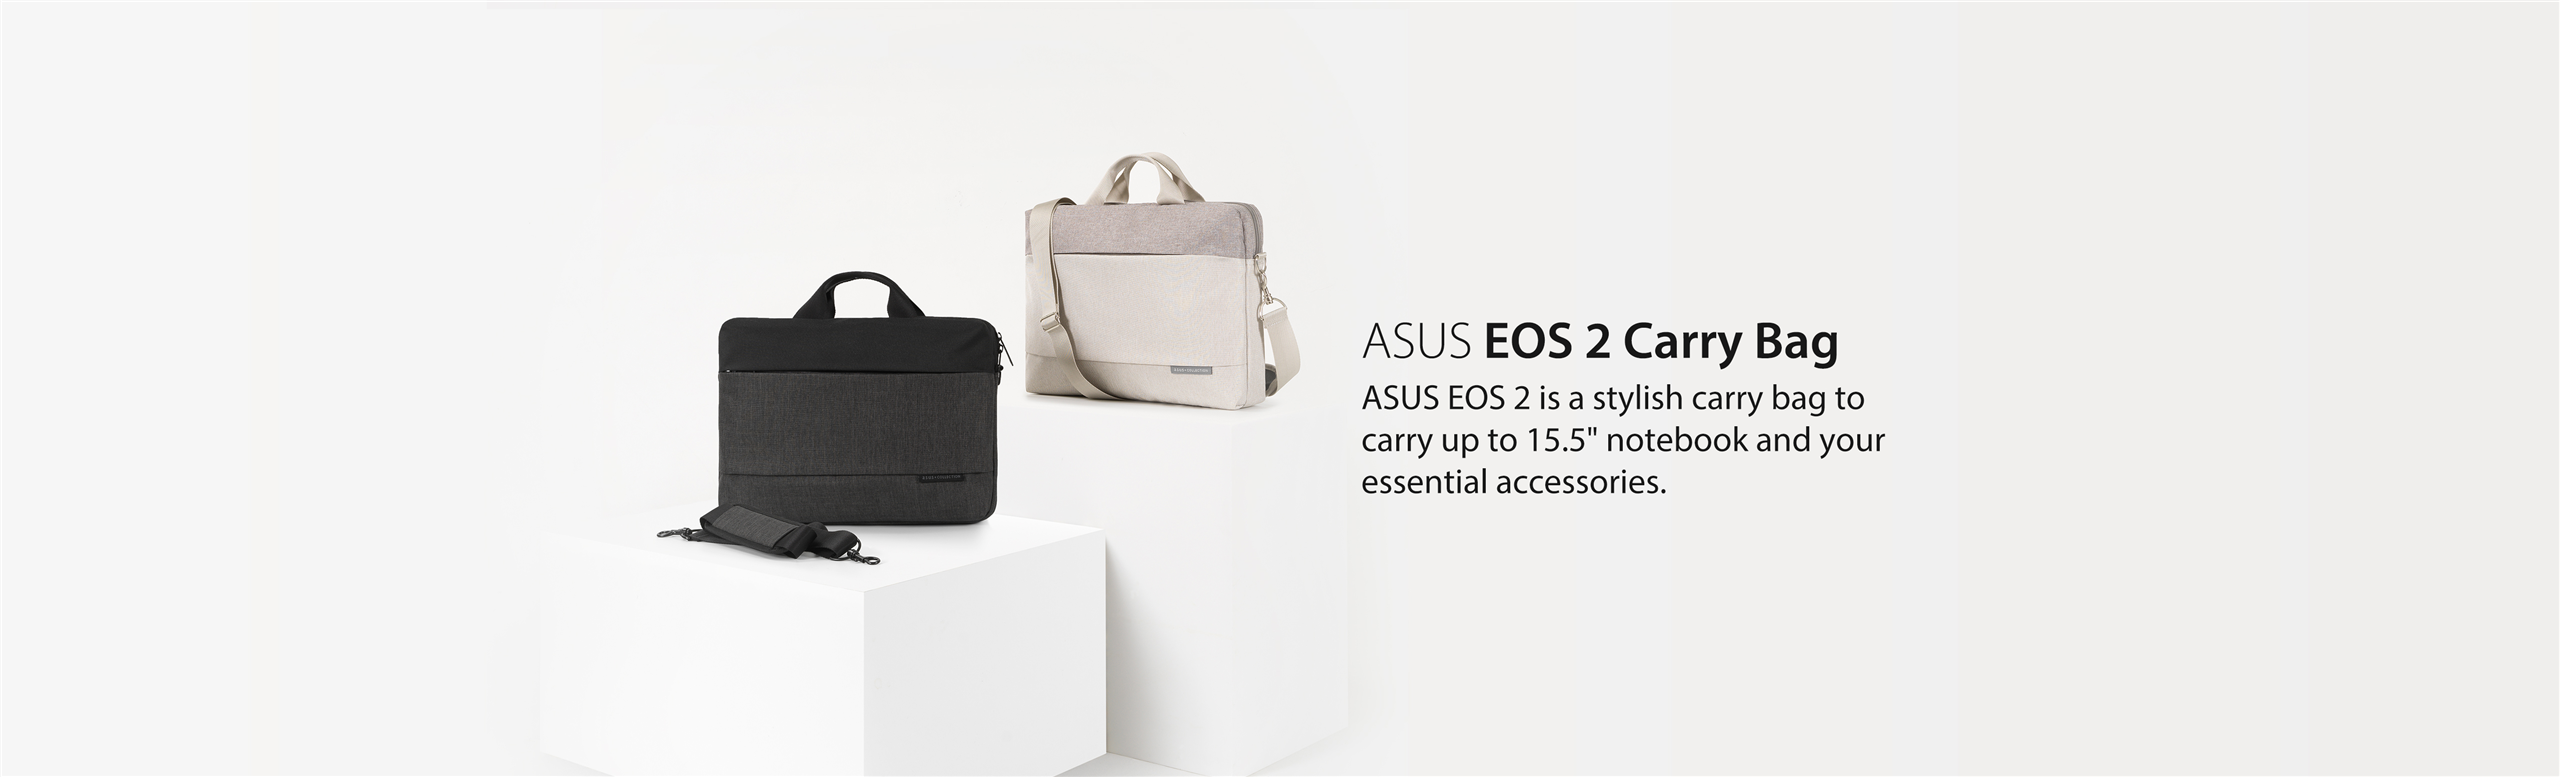 ASUS Apparels, Bags and Gears